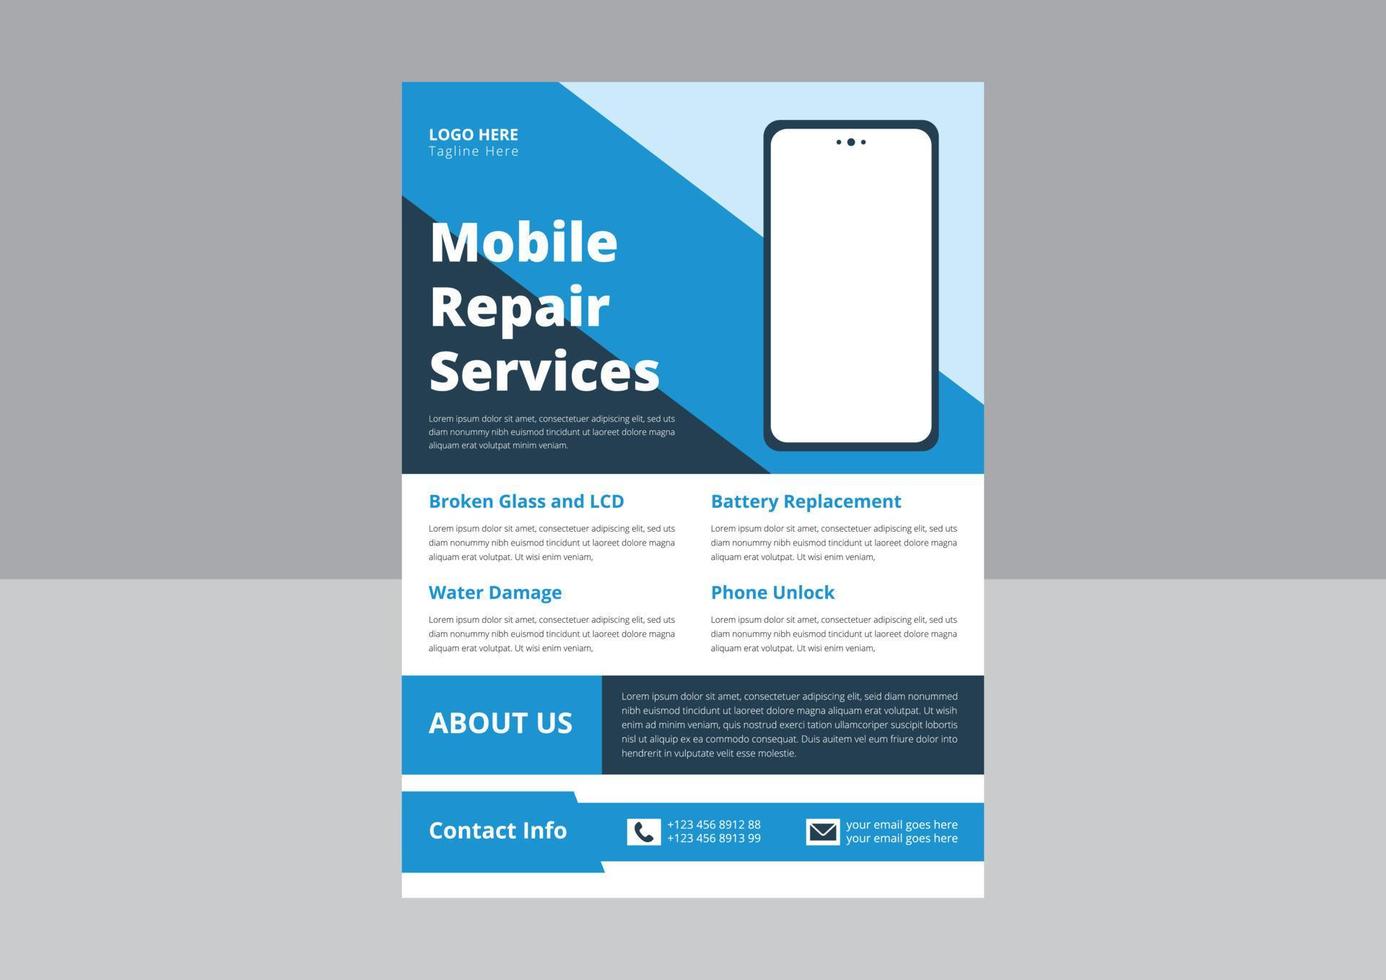 Smartphone Repair Service flyer template. Cell phone repair flyer poster template. Mobile Repair Experts Flyer Design. Cover, A4 size, Template Design. vector